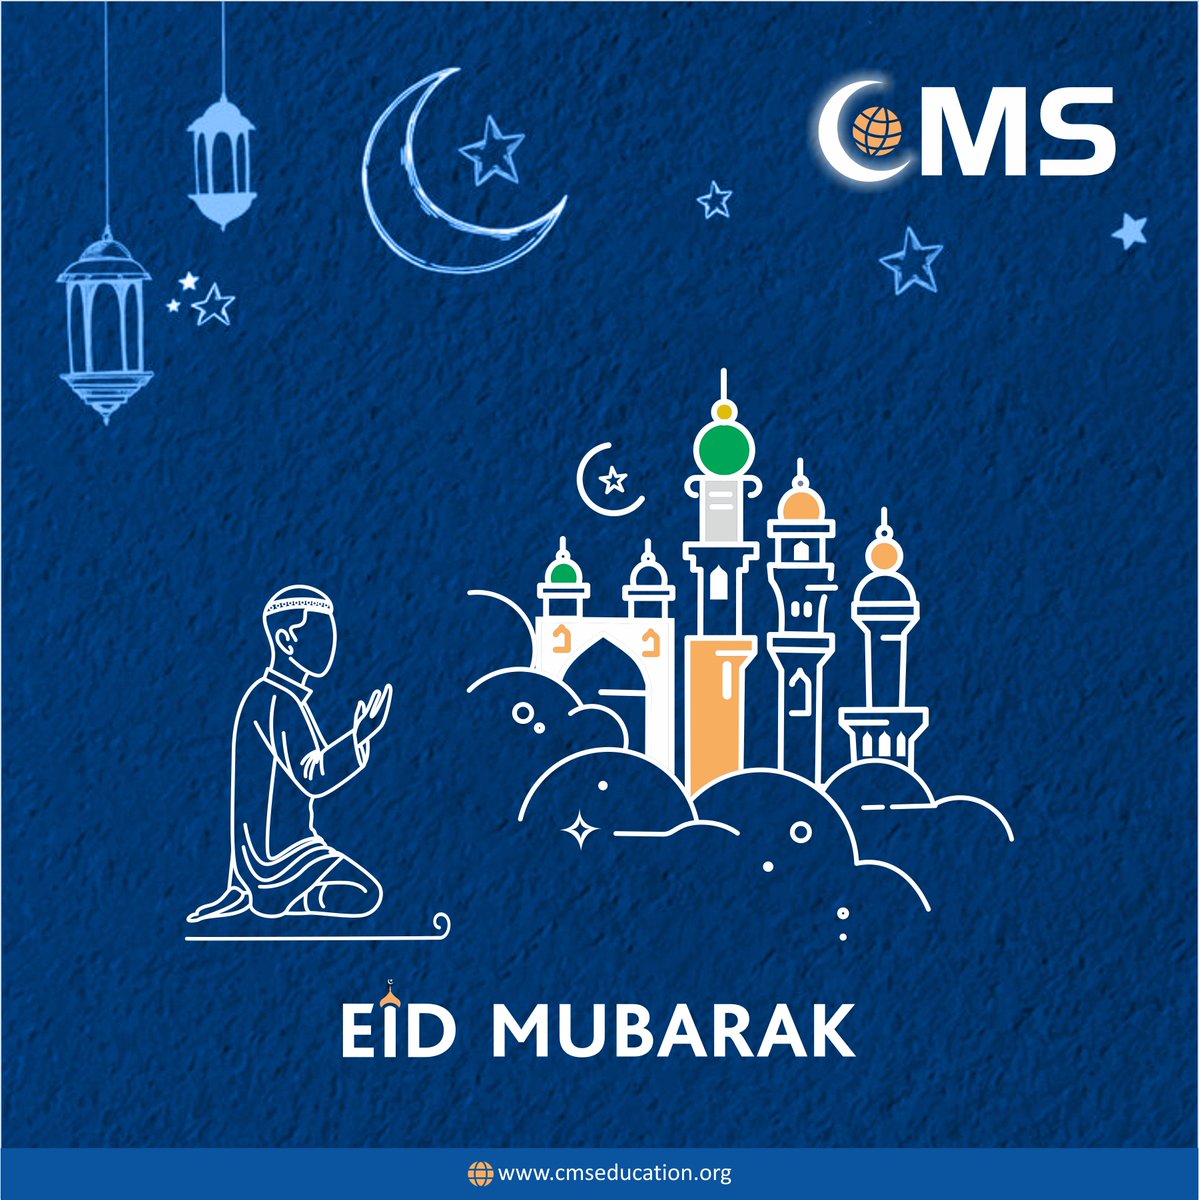 Eid Mubarak! 🌙

Wishing all our students, parents, and staff a joyous and blessed Eid-ul-Fitr! 🕌 May this special occasion bring you peace, happiness, and prosperity.

#CMS #CMSeducation #CMSStudents #AcademicExcellence #OutstandingTeachers #EidMubarak #Celebration #Joy #Love